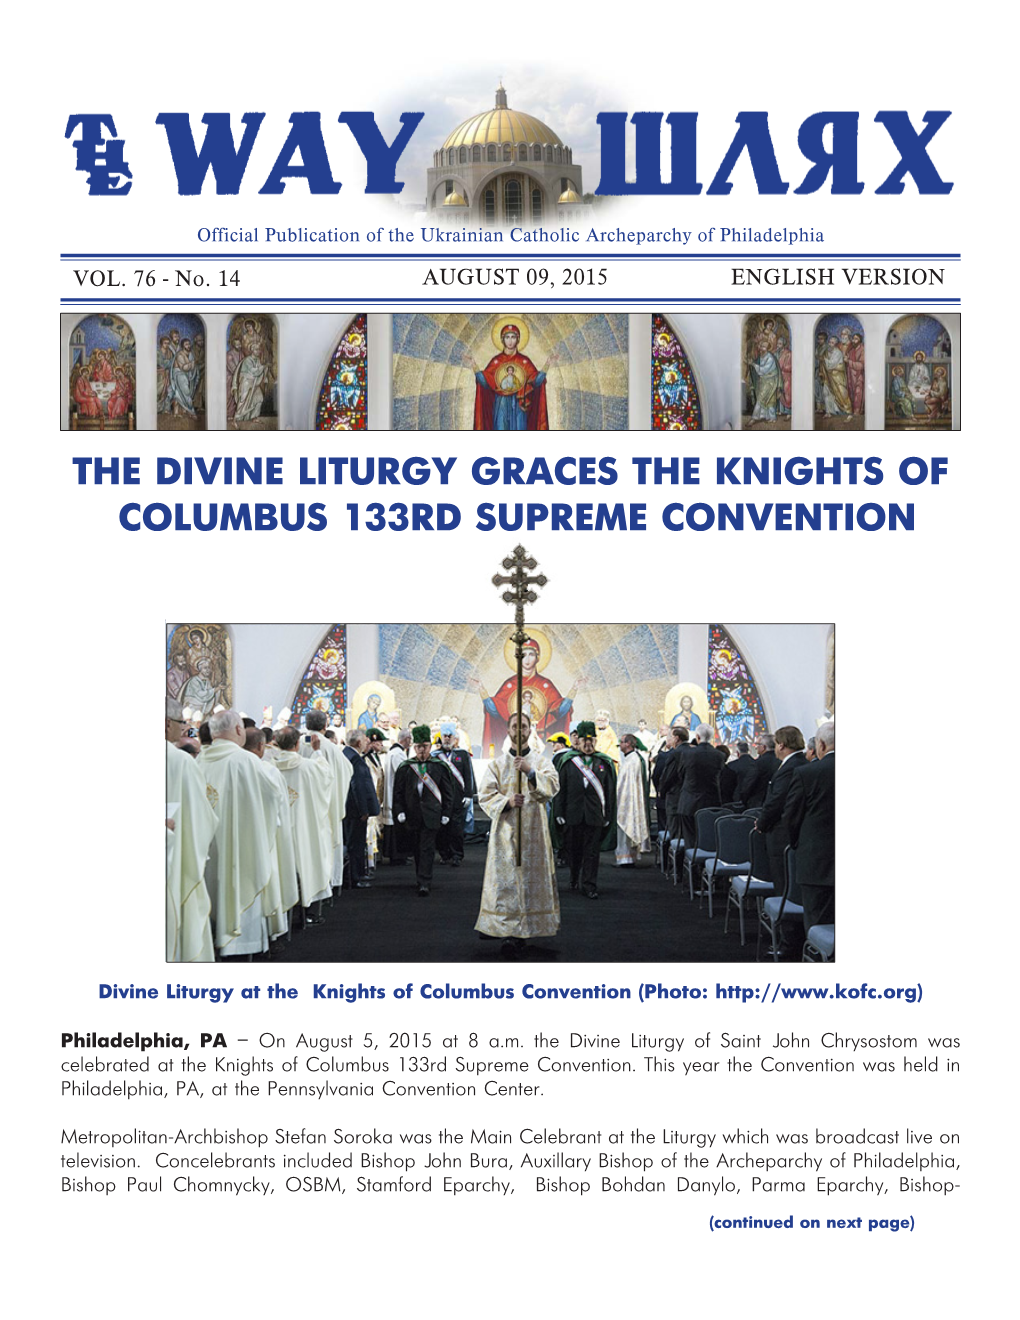 The Divine Liturgy Graces the Knights of Columbus 133Rd Supreme Convention